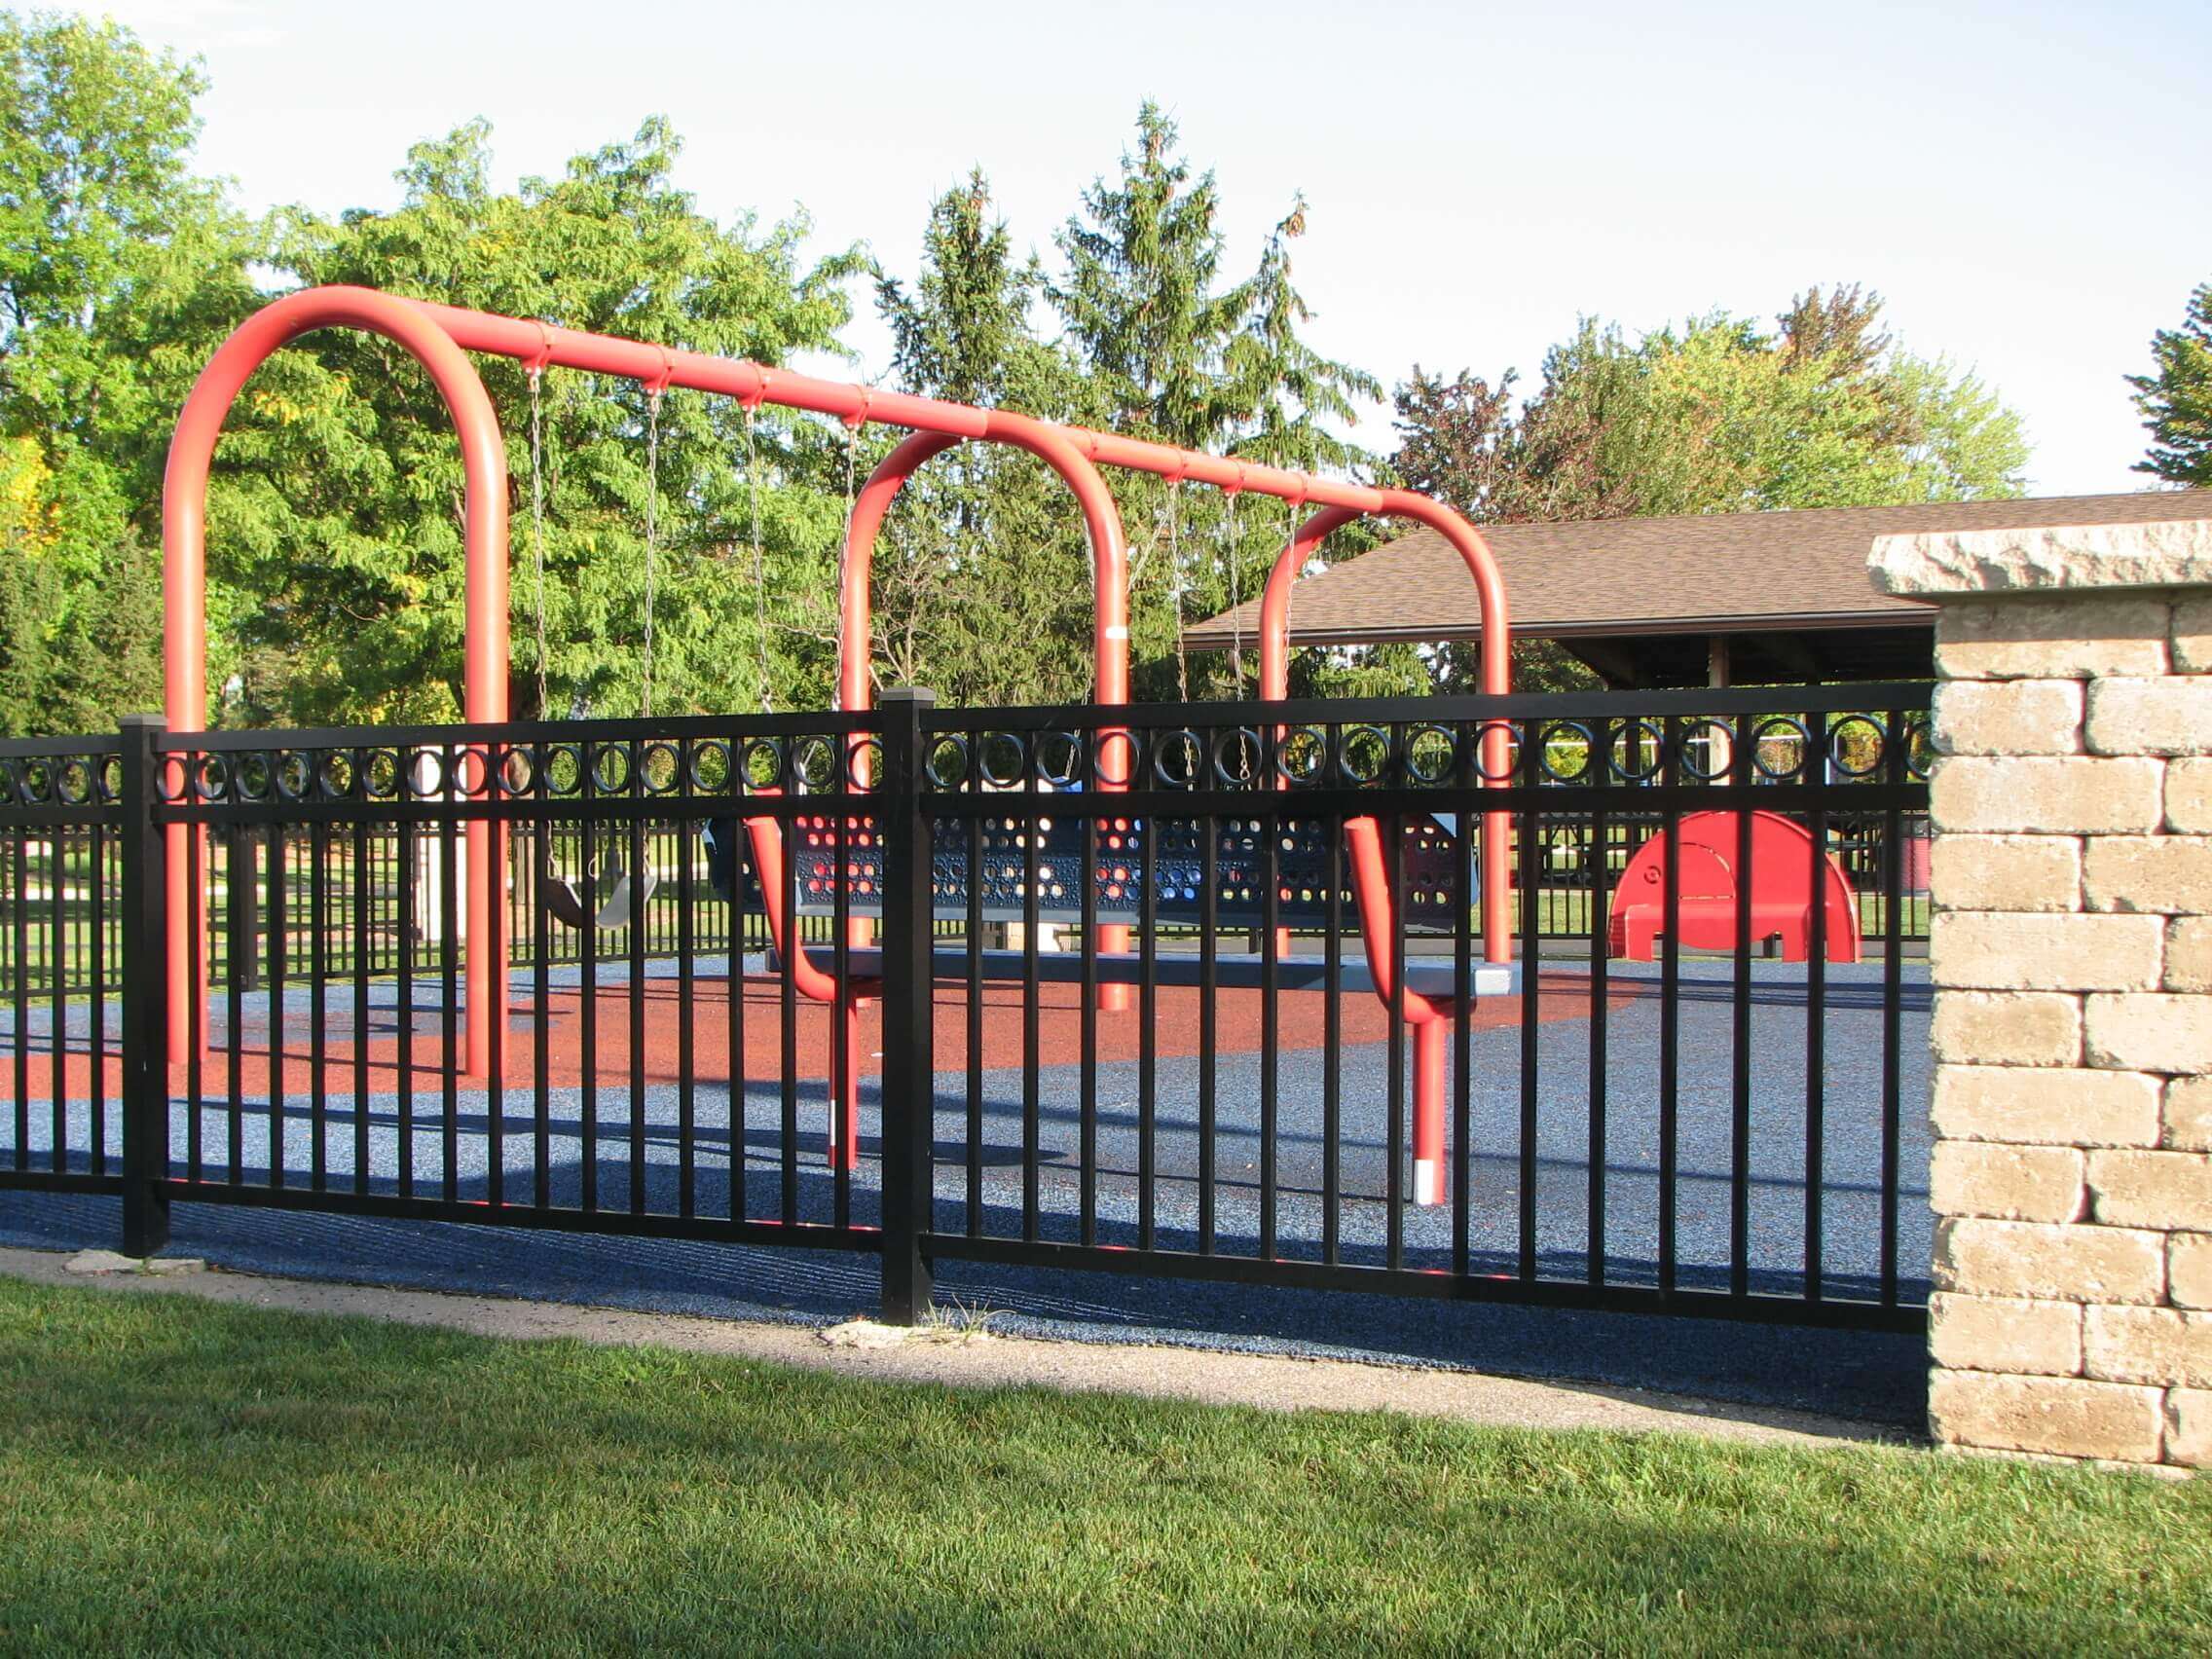 Buy Aluminum Fence Online Aluminum Fencing and Supplies 